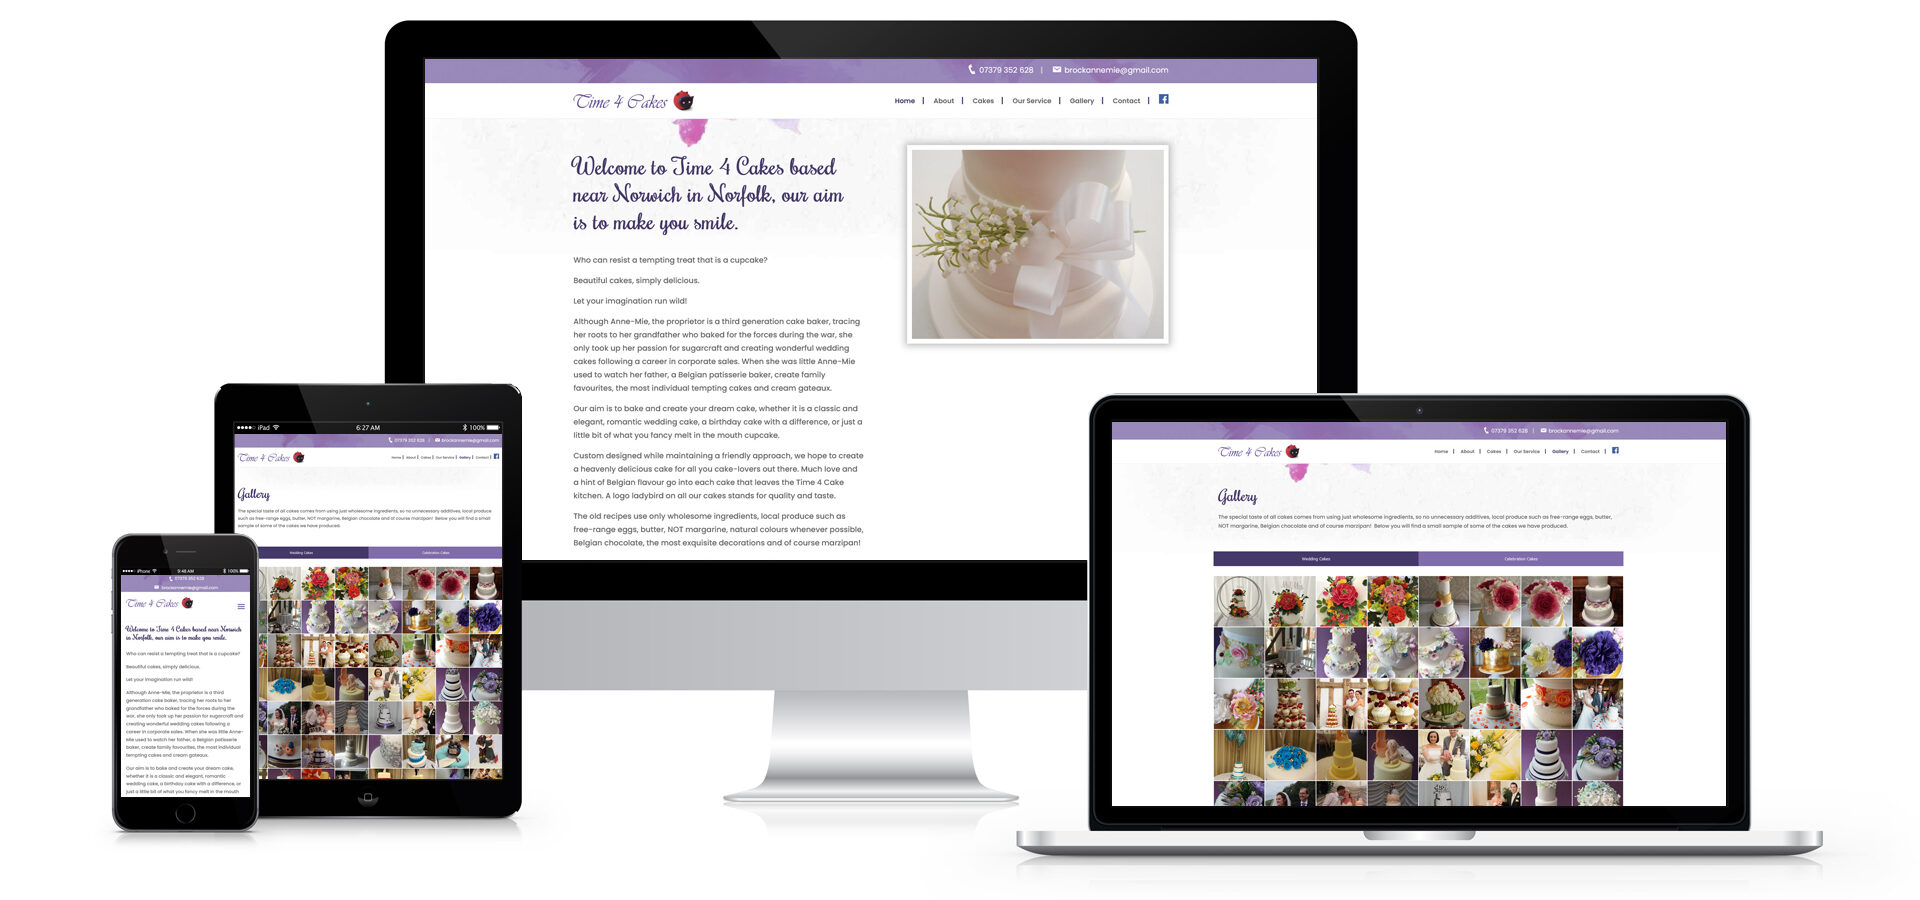 Time 4 Cakes - Responsive Website